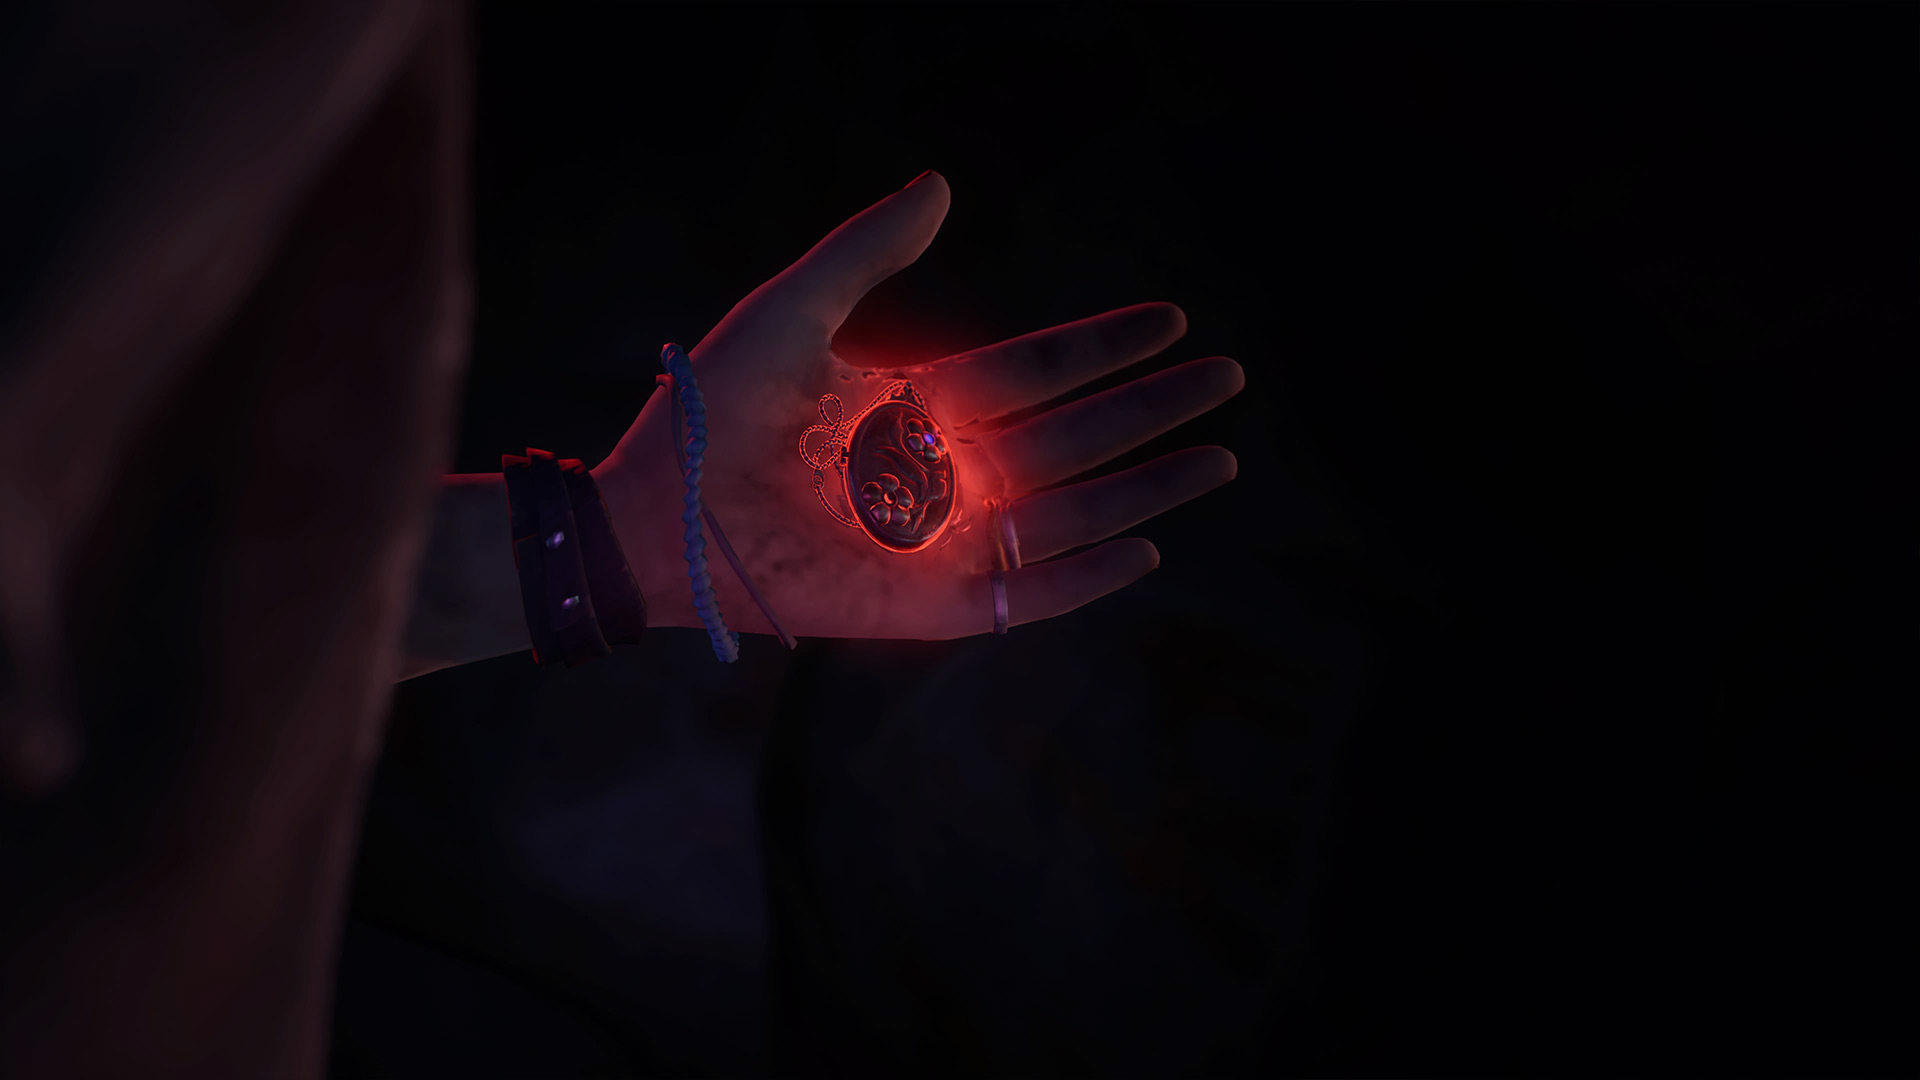 Life is Strange True Colors memory locations: Alex holding a red, glowing locket in her hand.